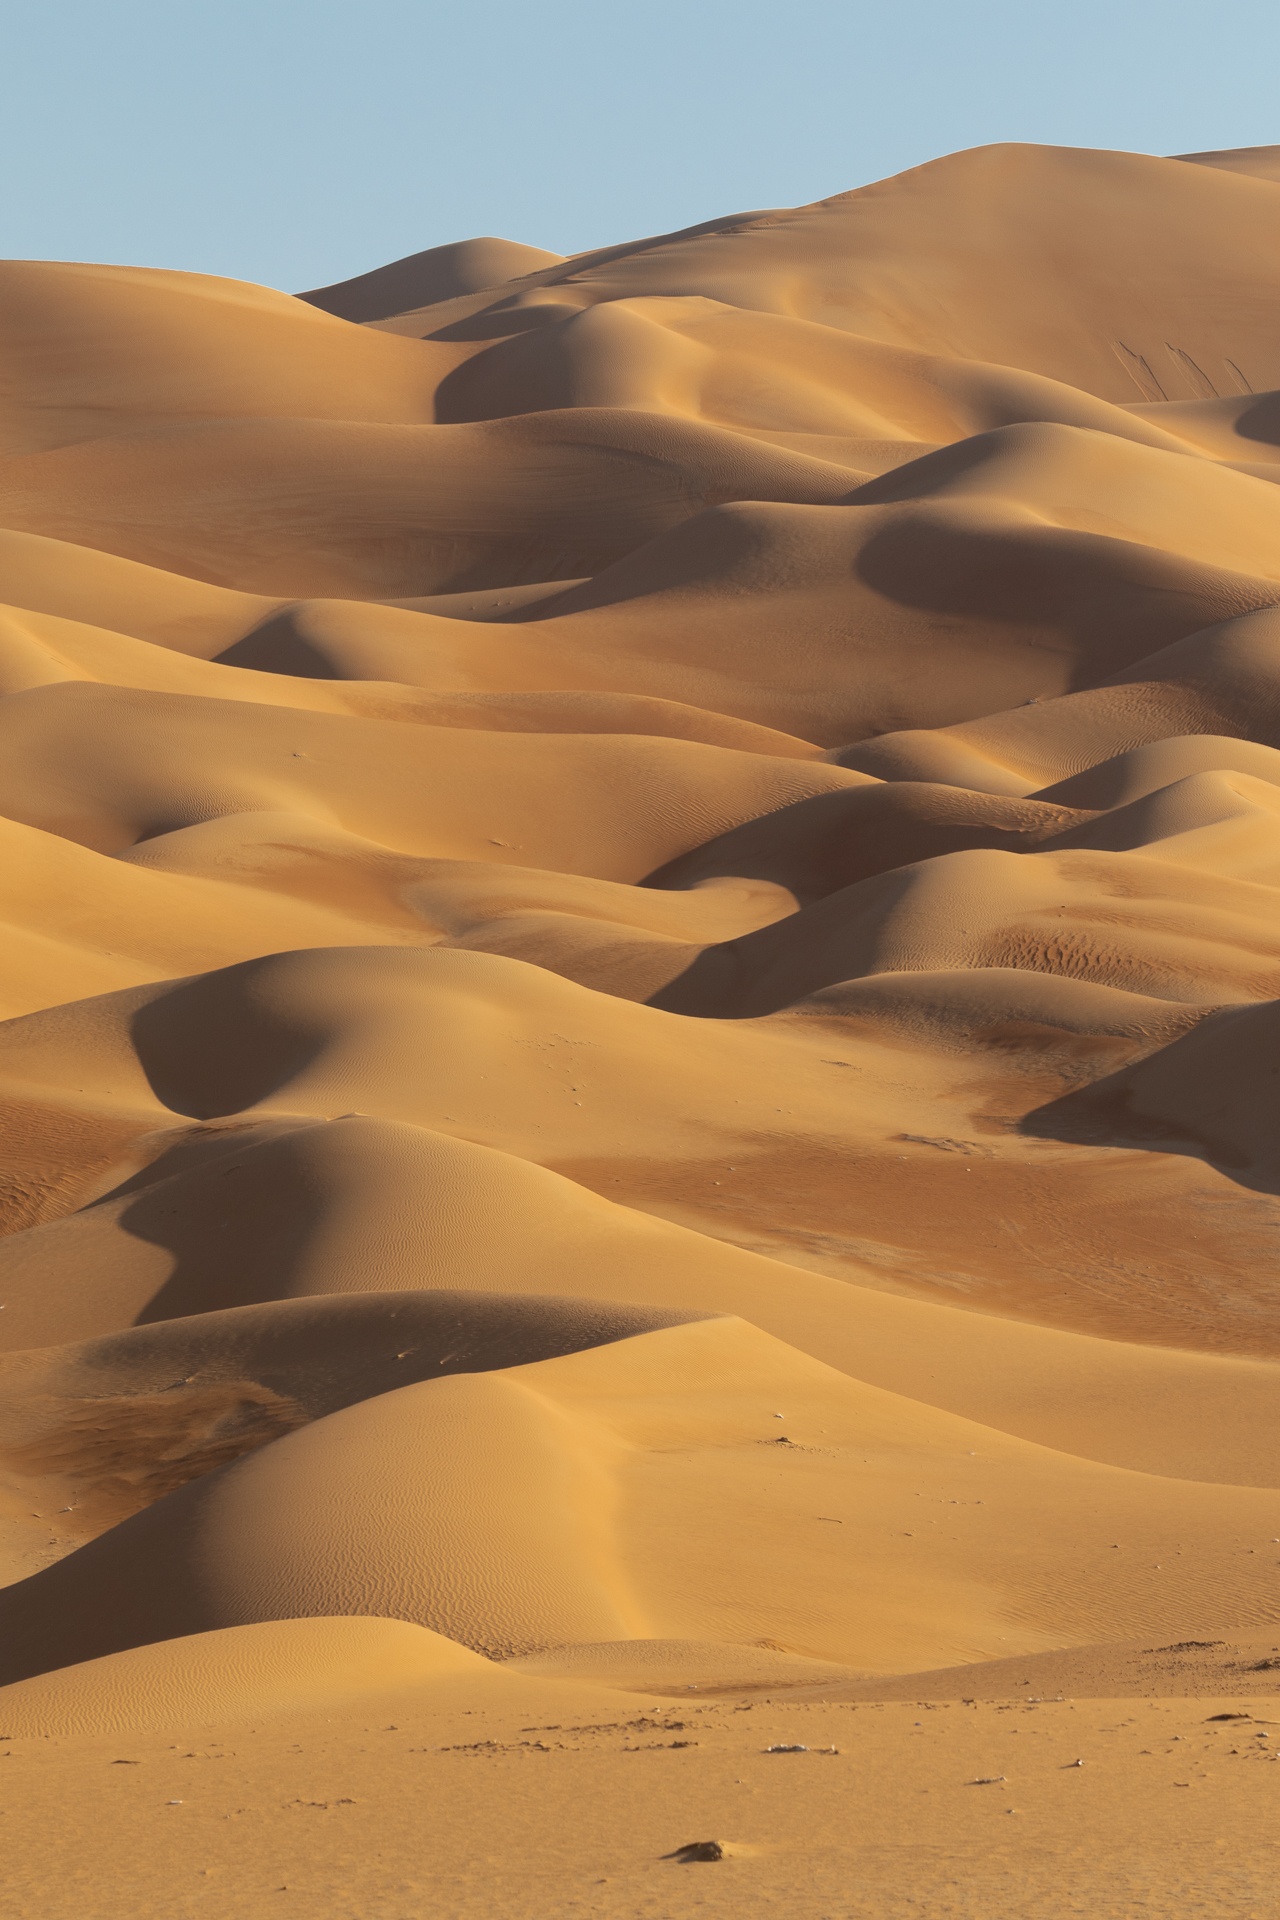 Shapes of sand dunes